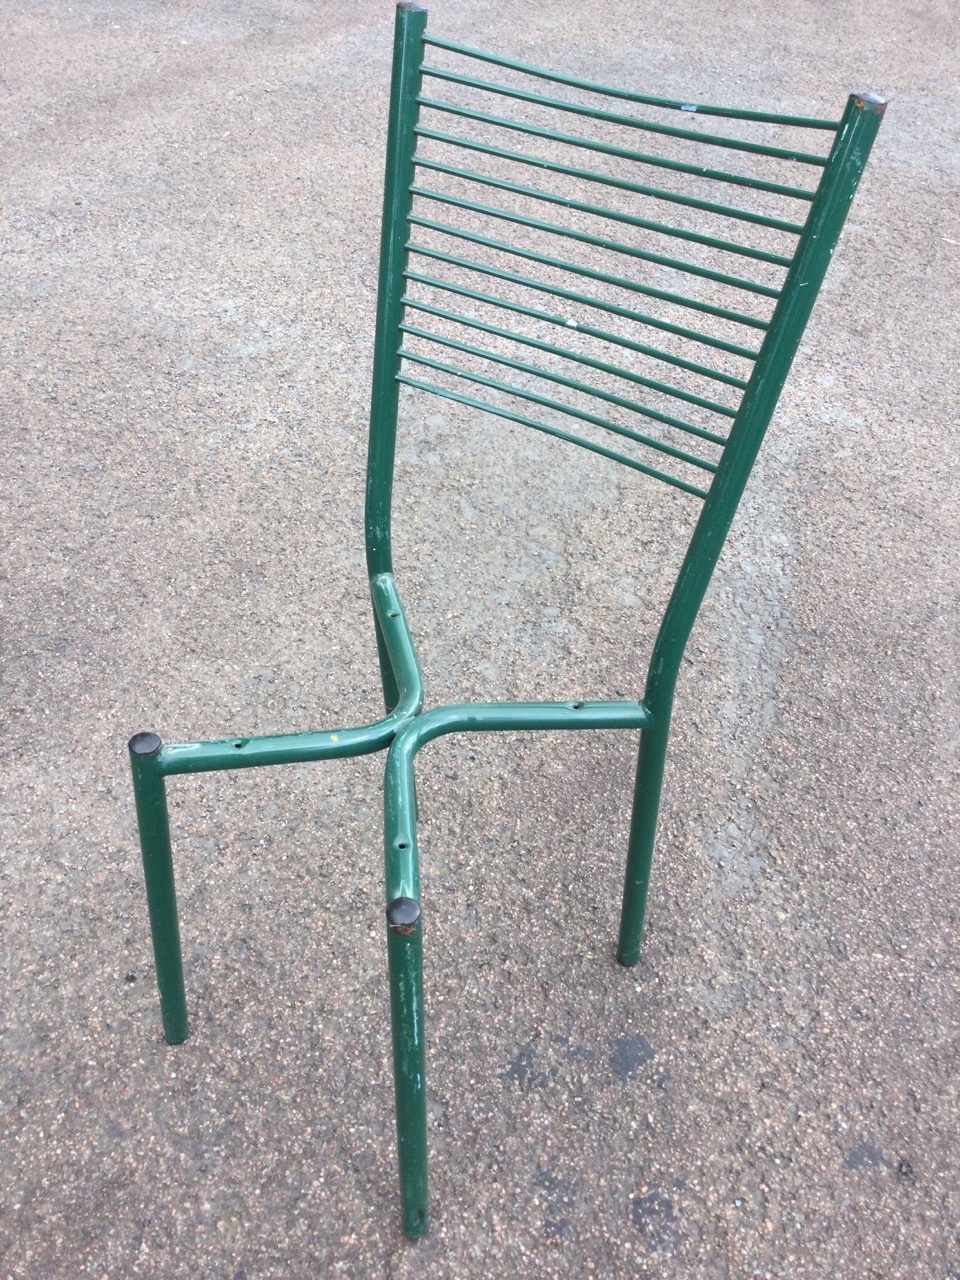 A set of four tubular metal chairs with tapering ribbed ladder backs - lacking seats. (4) - Image 3 of 3